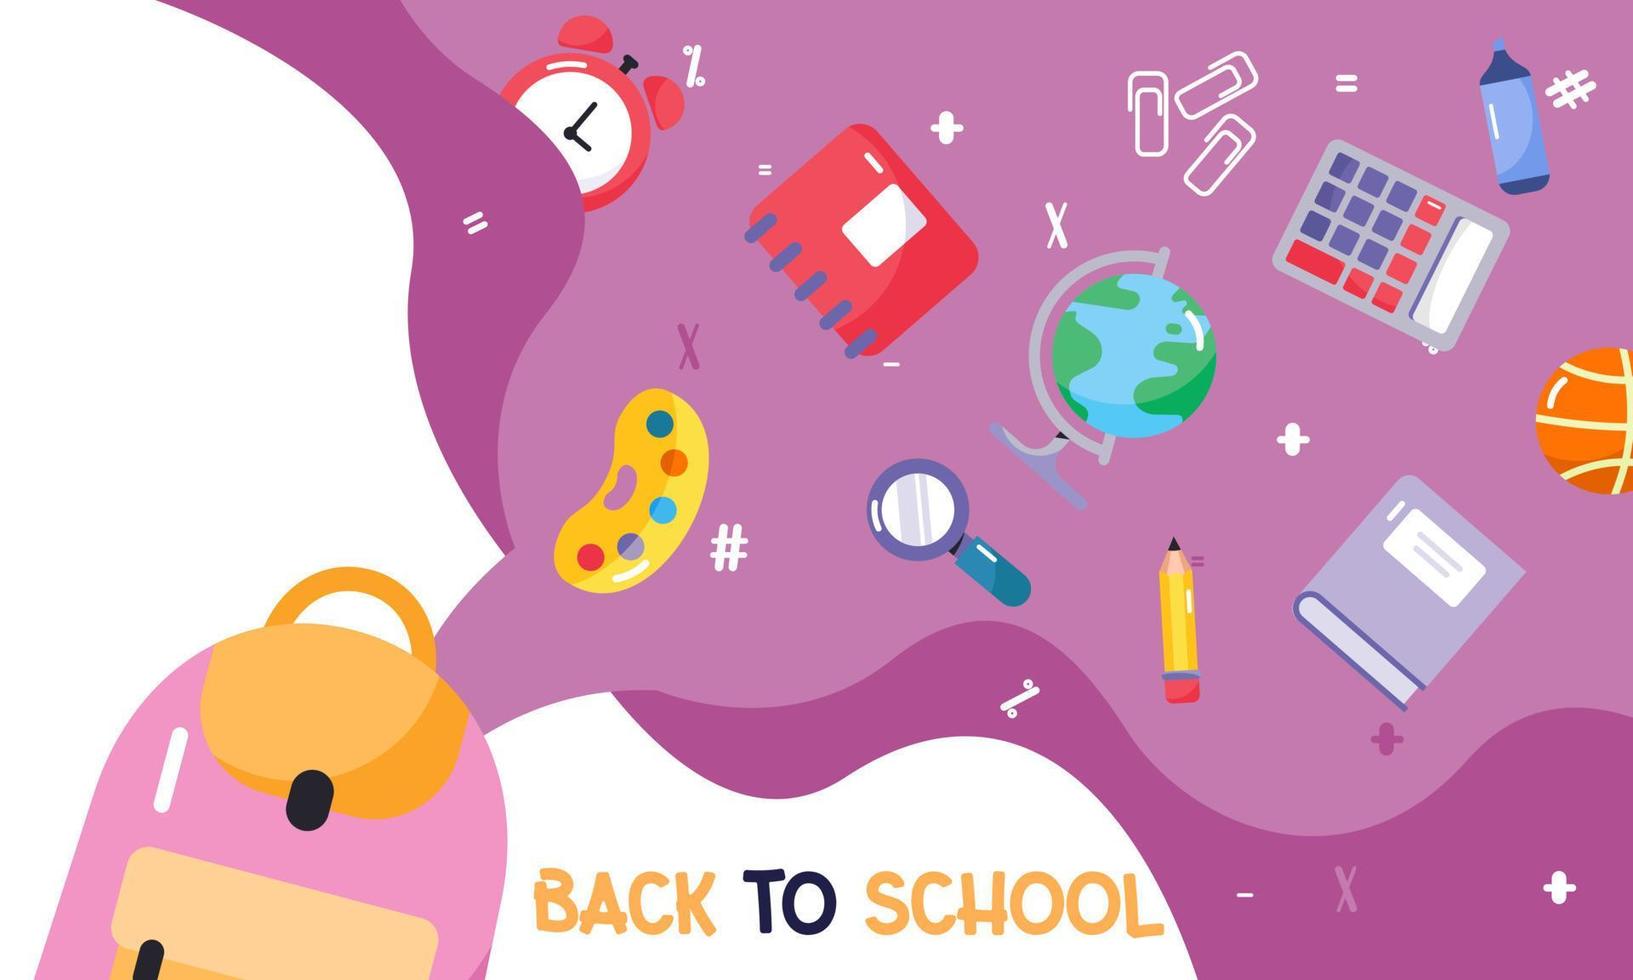 Back to School with Students and Stationery Vector Banner